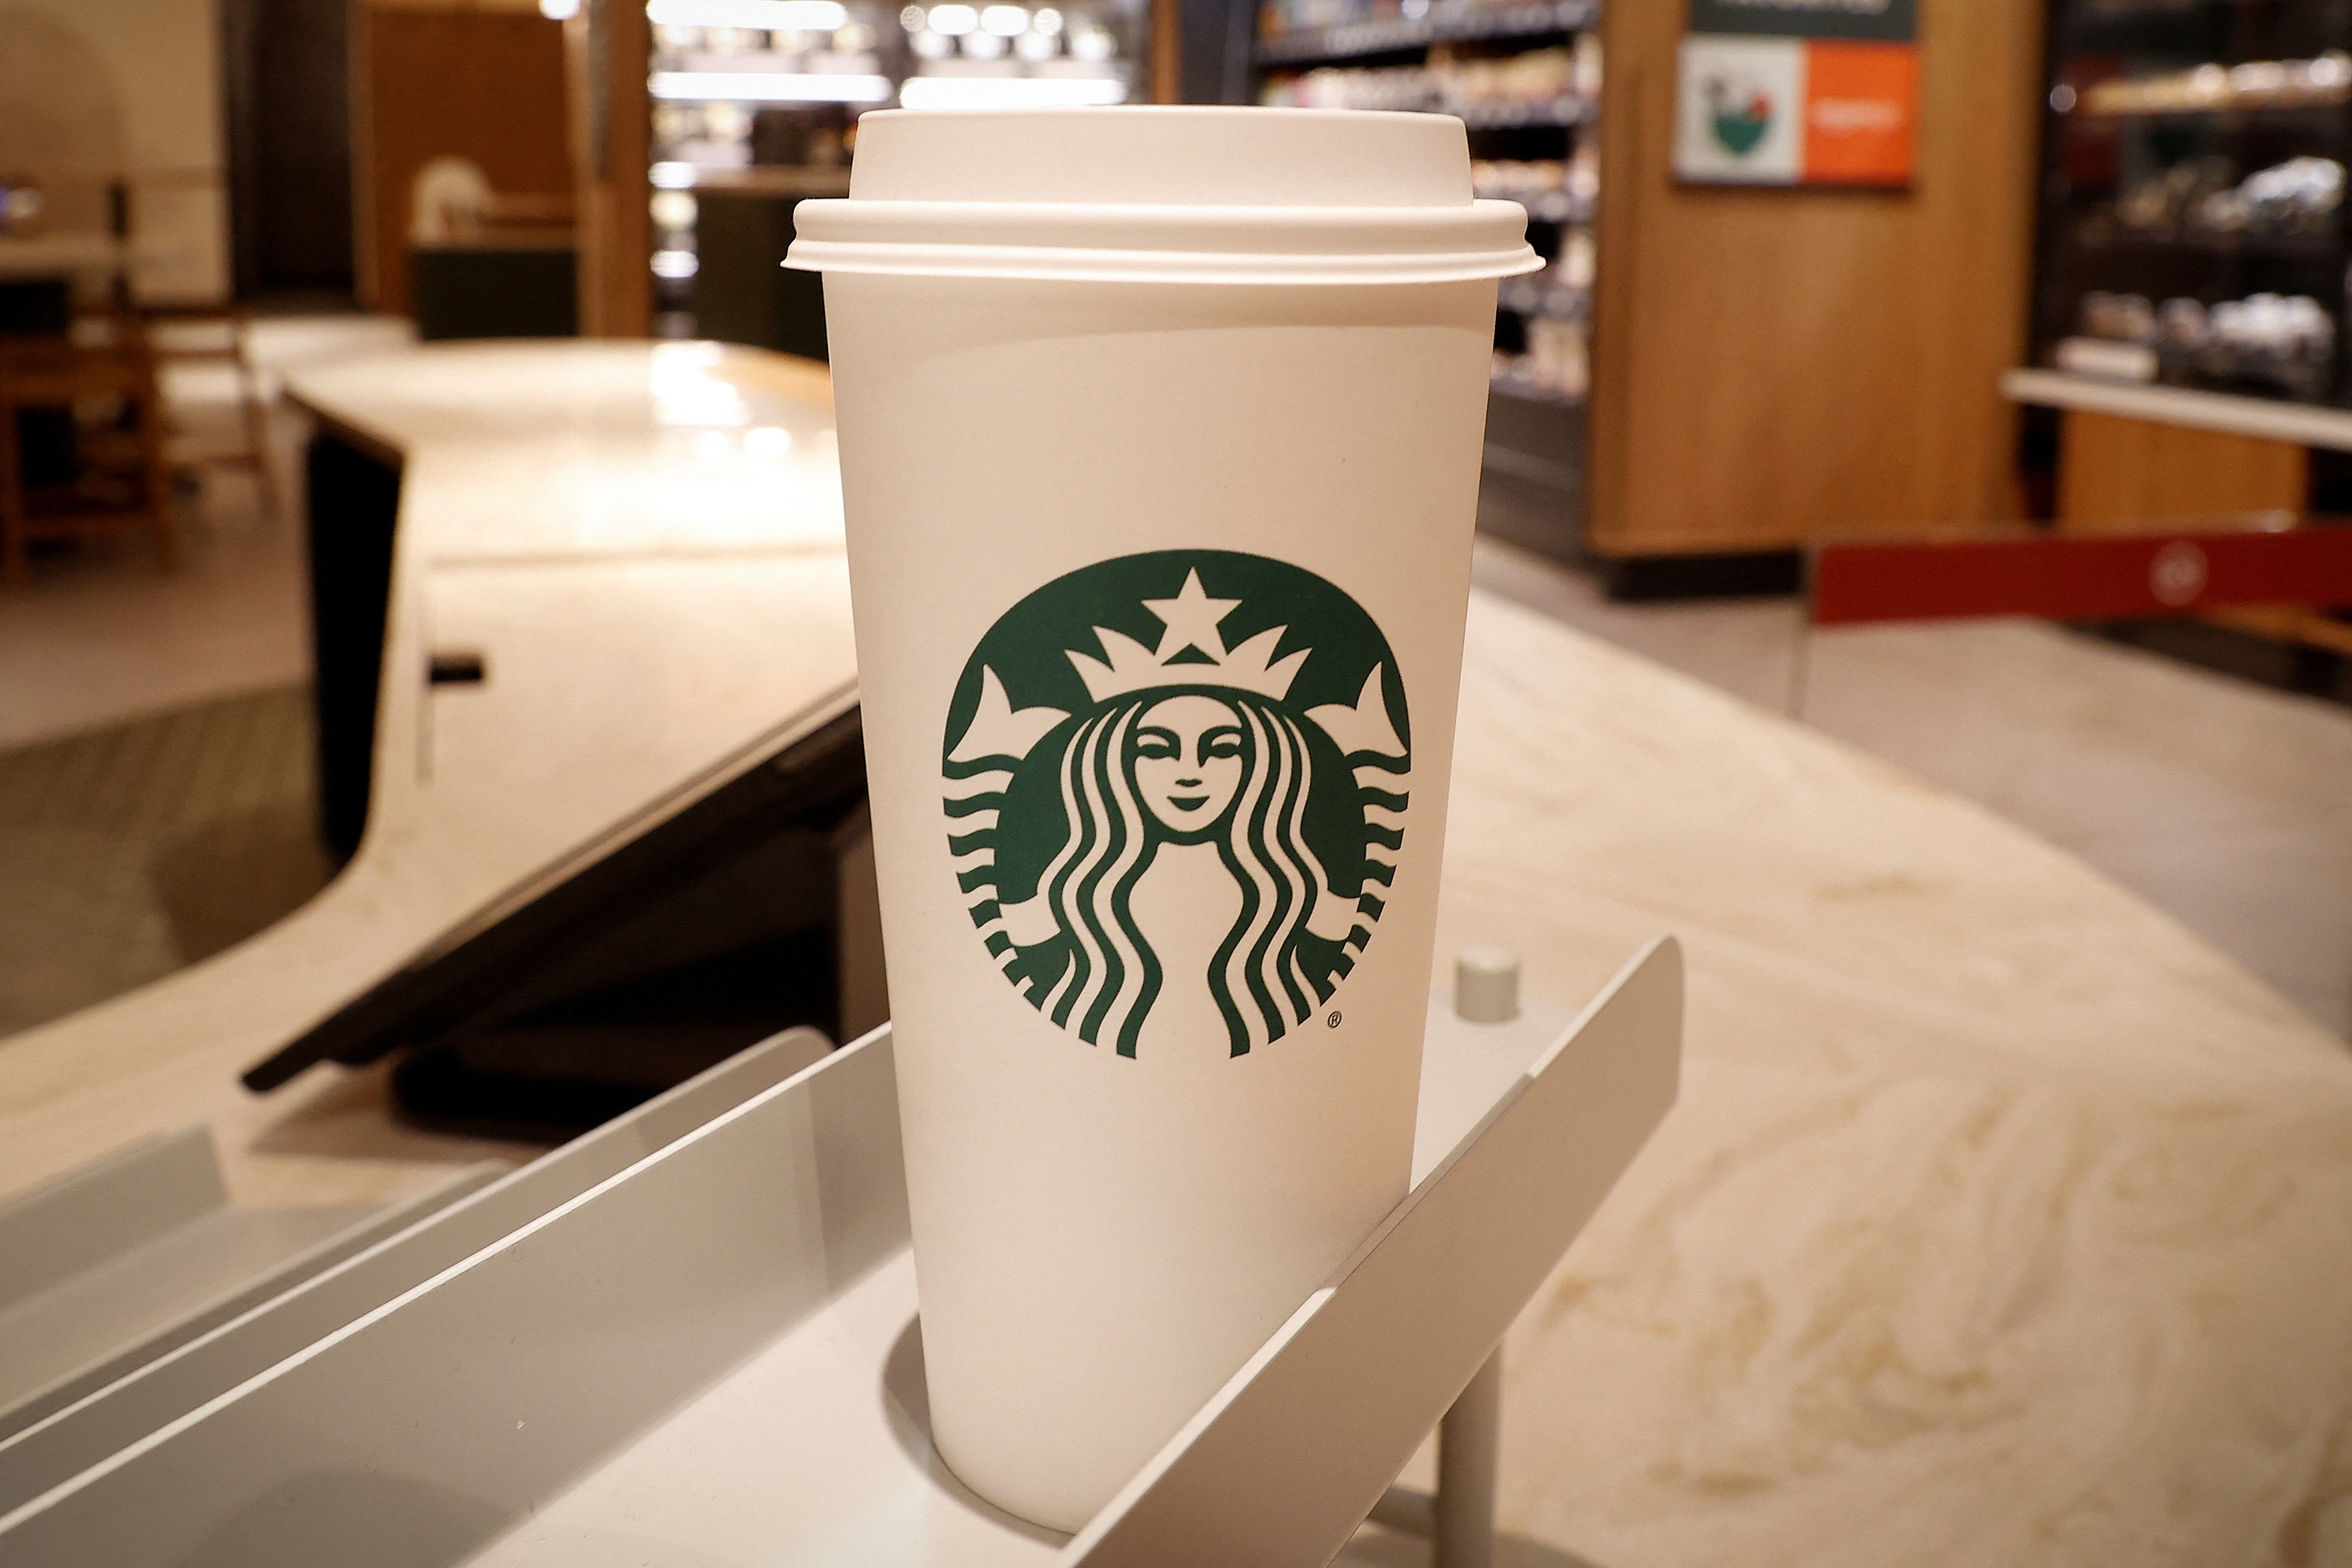 New Starbucks store, its first-ever in partnership with Amazon Go is pictured ahead of opening in New York